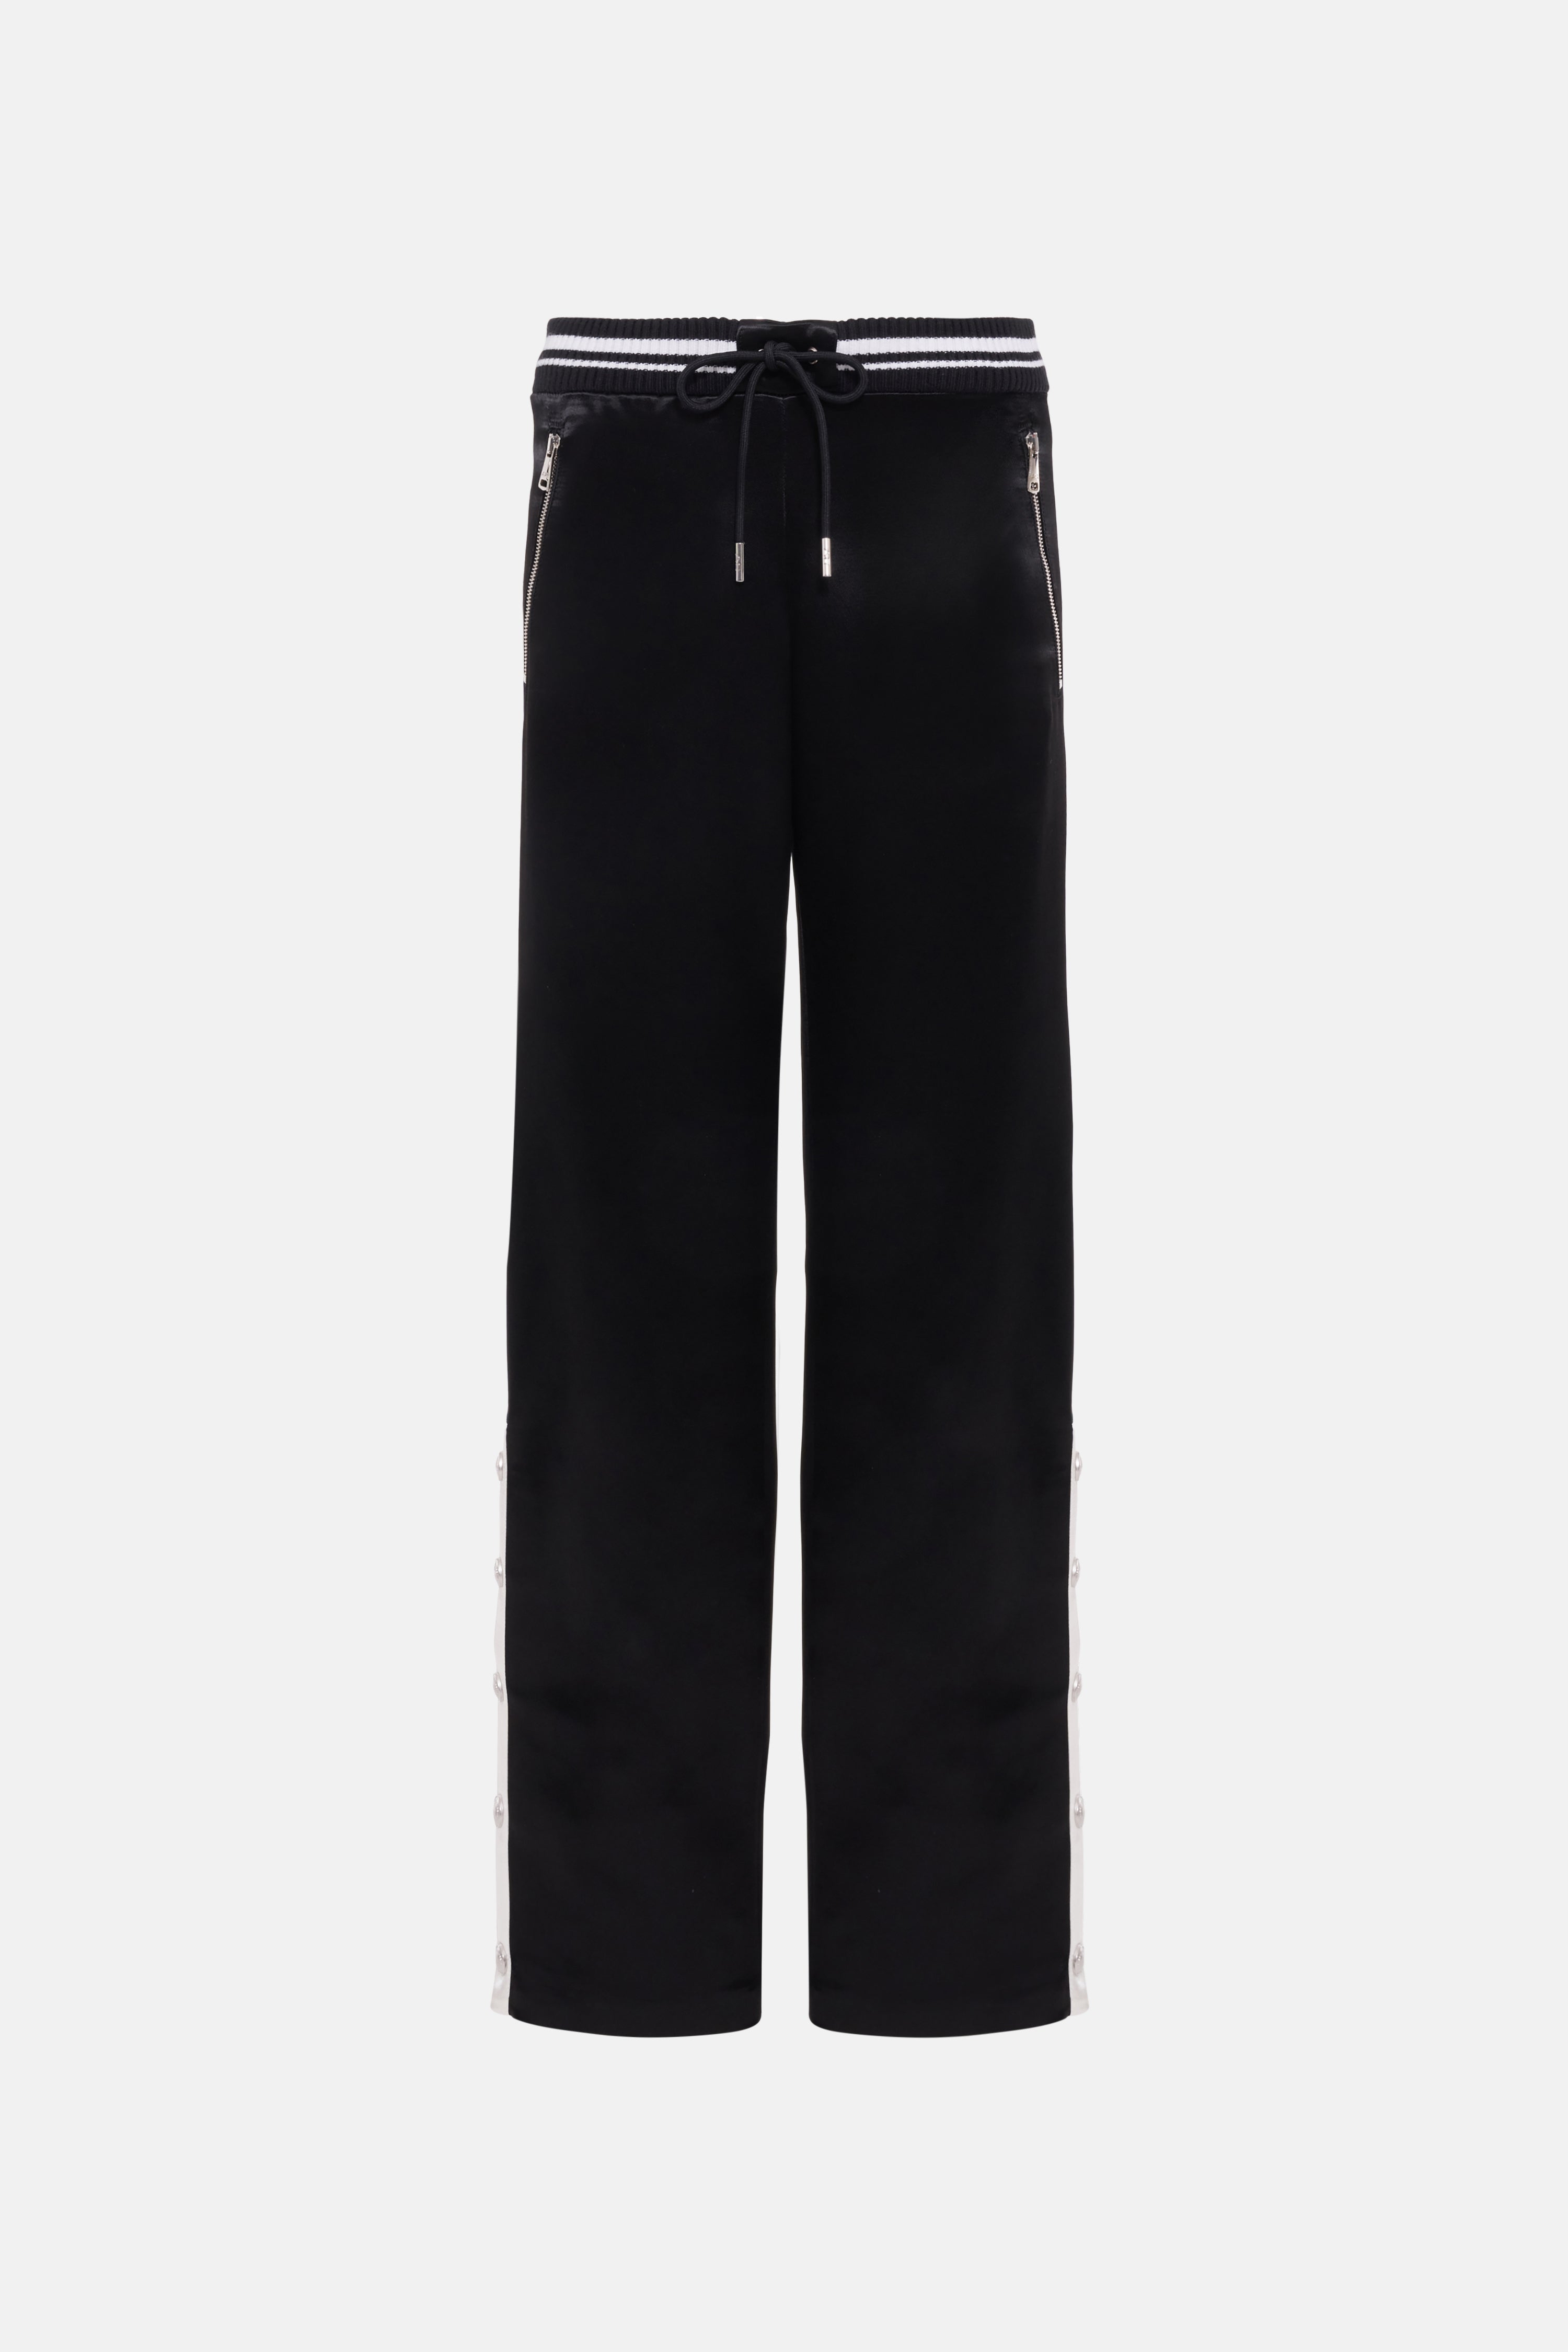 SATIN TRACK PANTS WITH BUTTONS